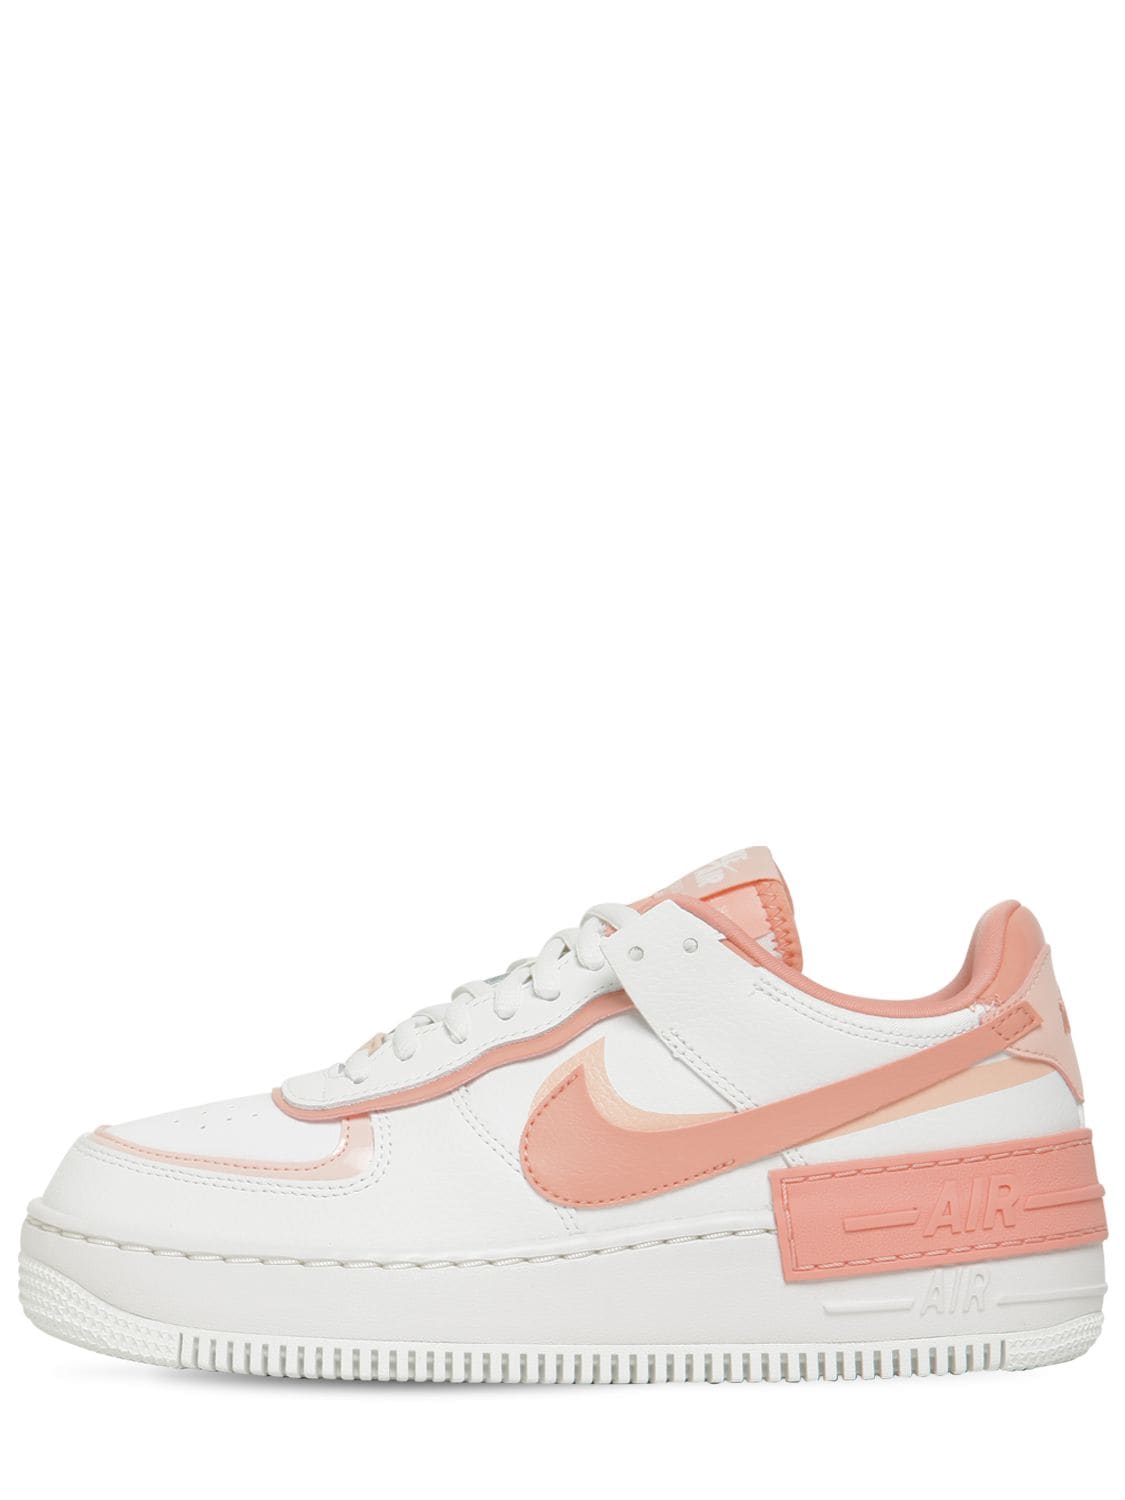 Nike Air Force 1 Shadow Sneakers In Washed Coral | ModeSens